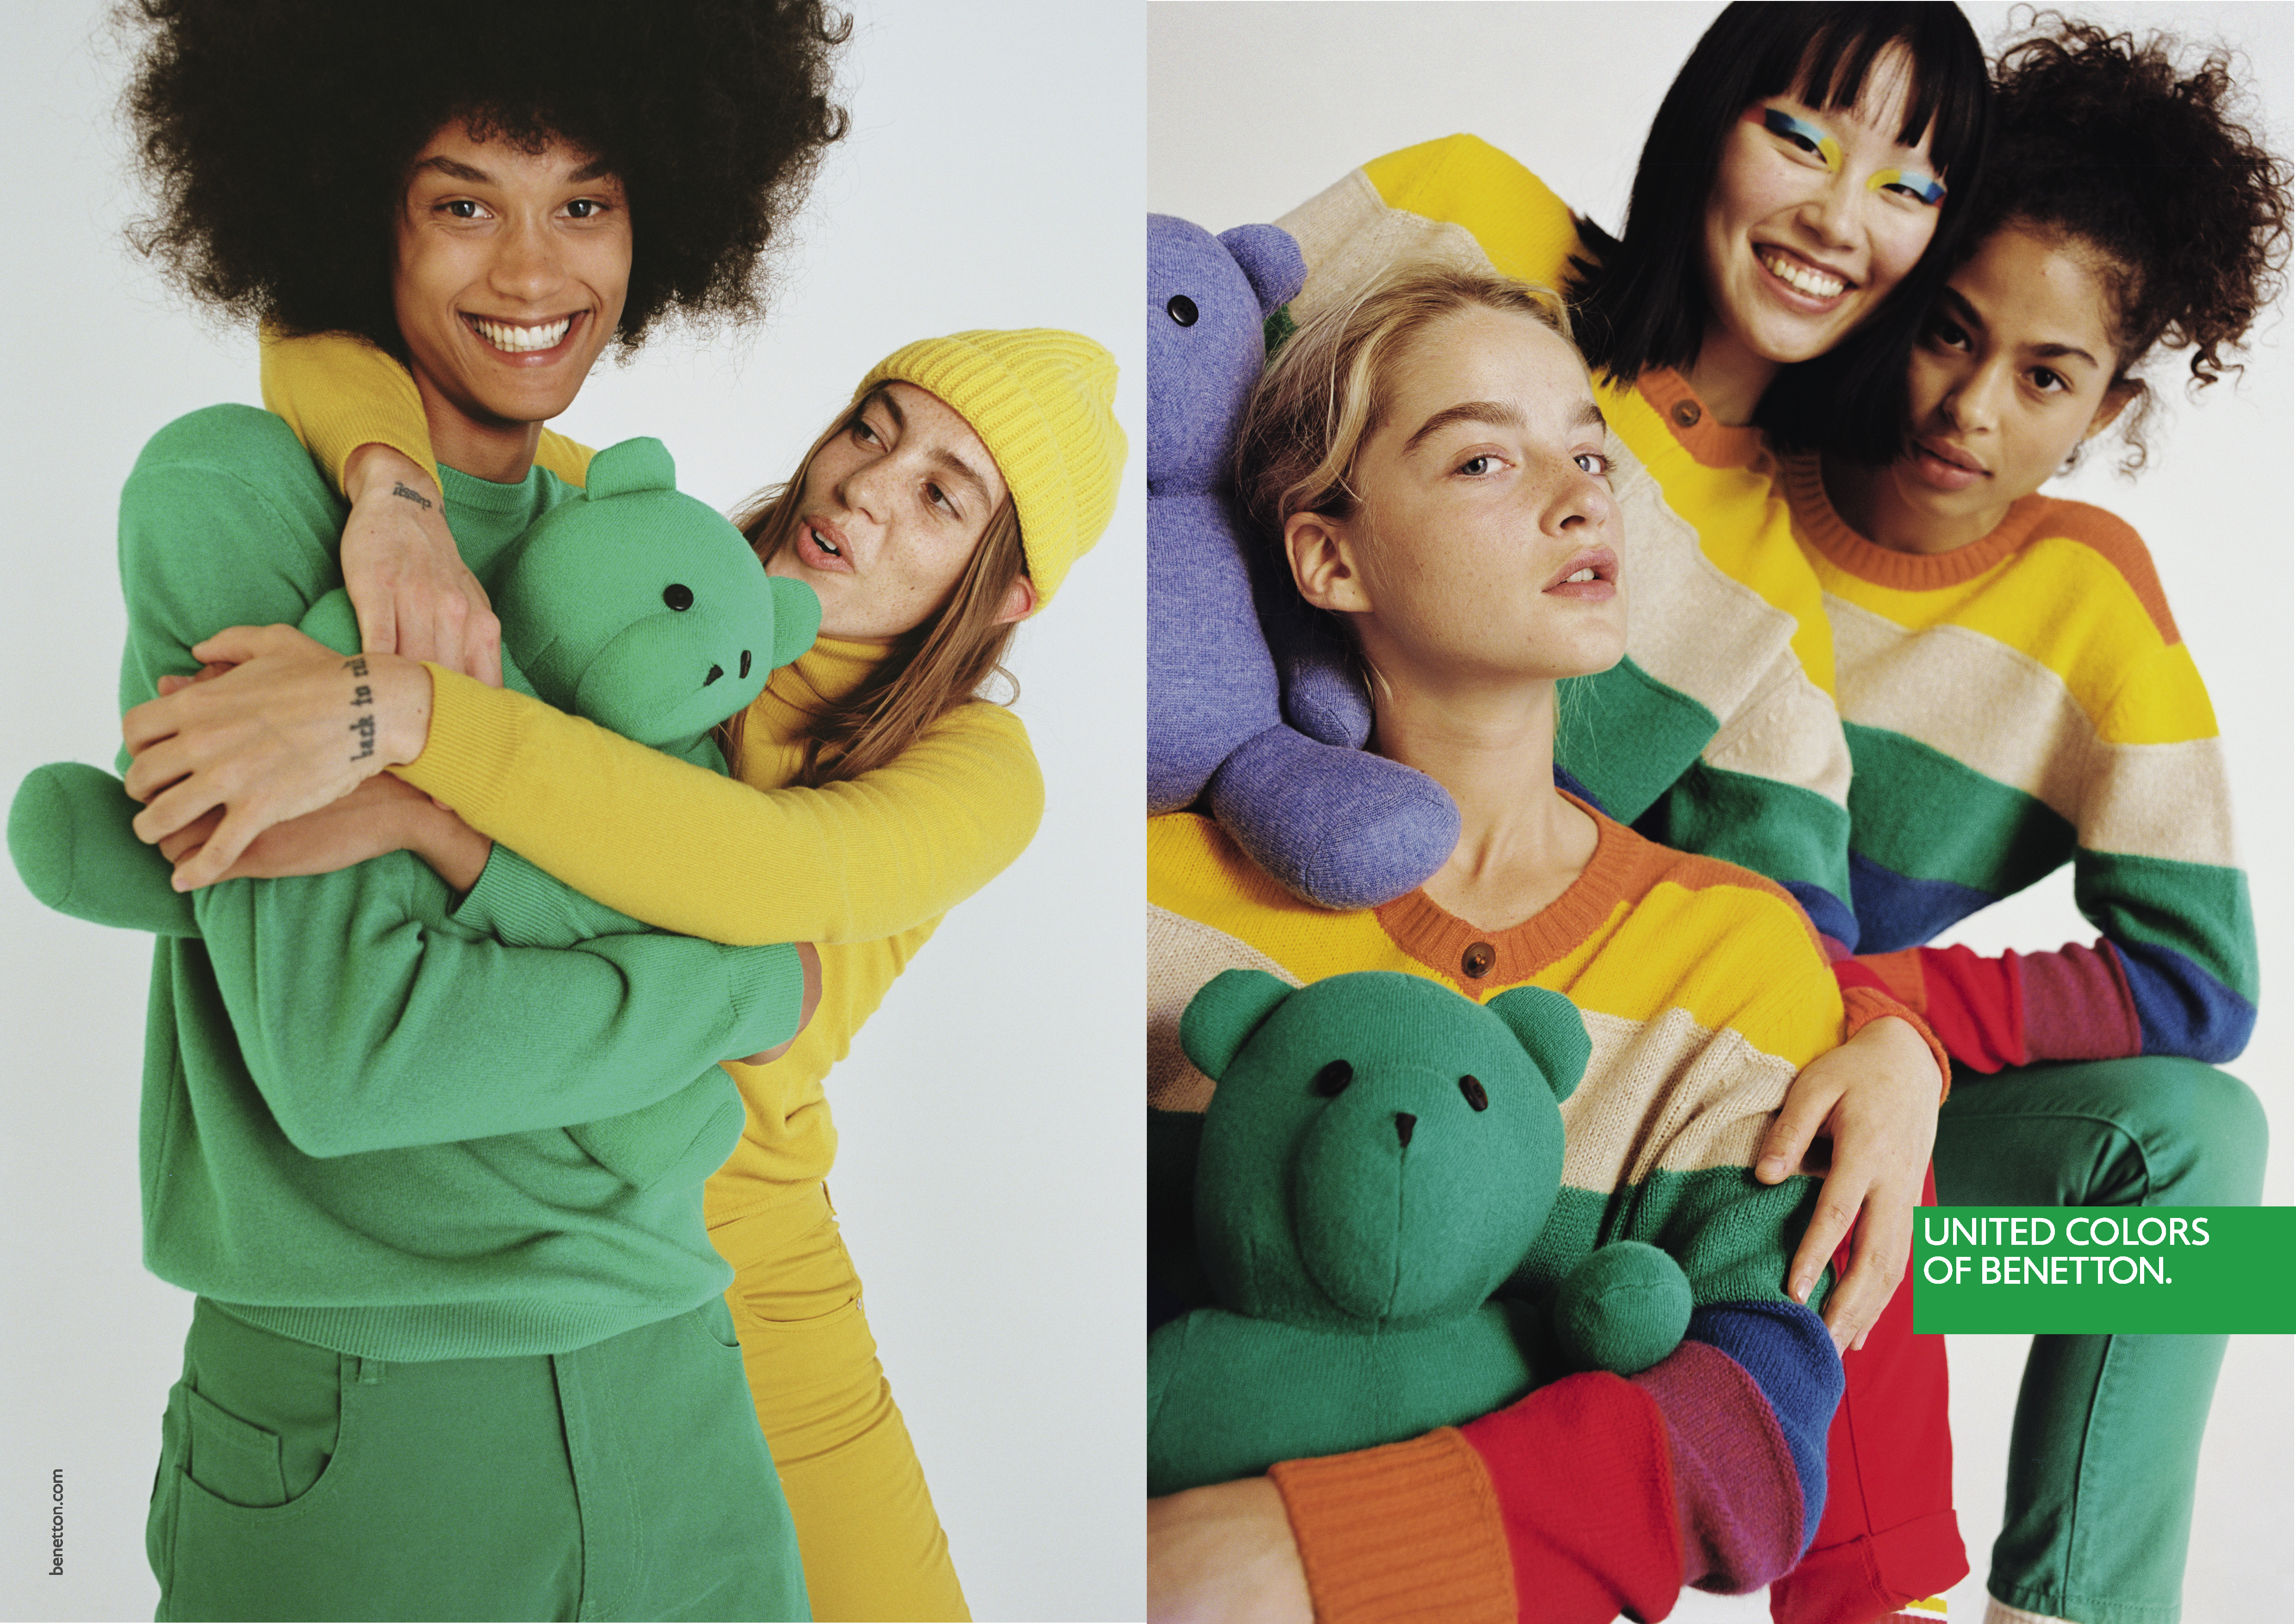 Benetton tribe. United Colors of Benetton. United Colors of Benetton United Colors of Benetton. United Colors of Benetton 108hu4657. Benetton зима 2020.